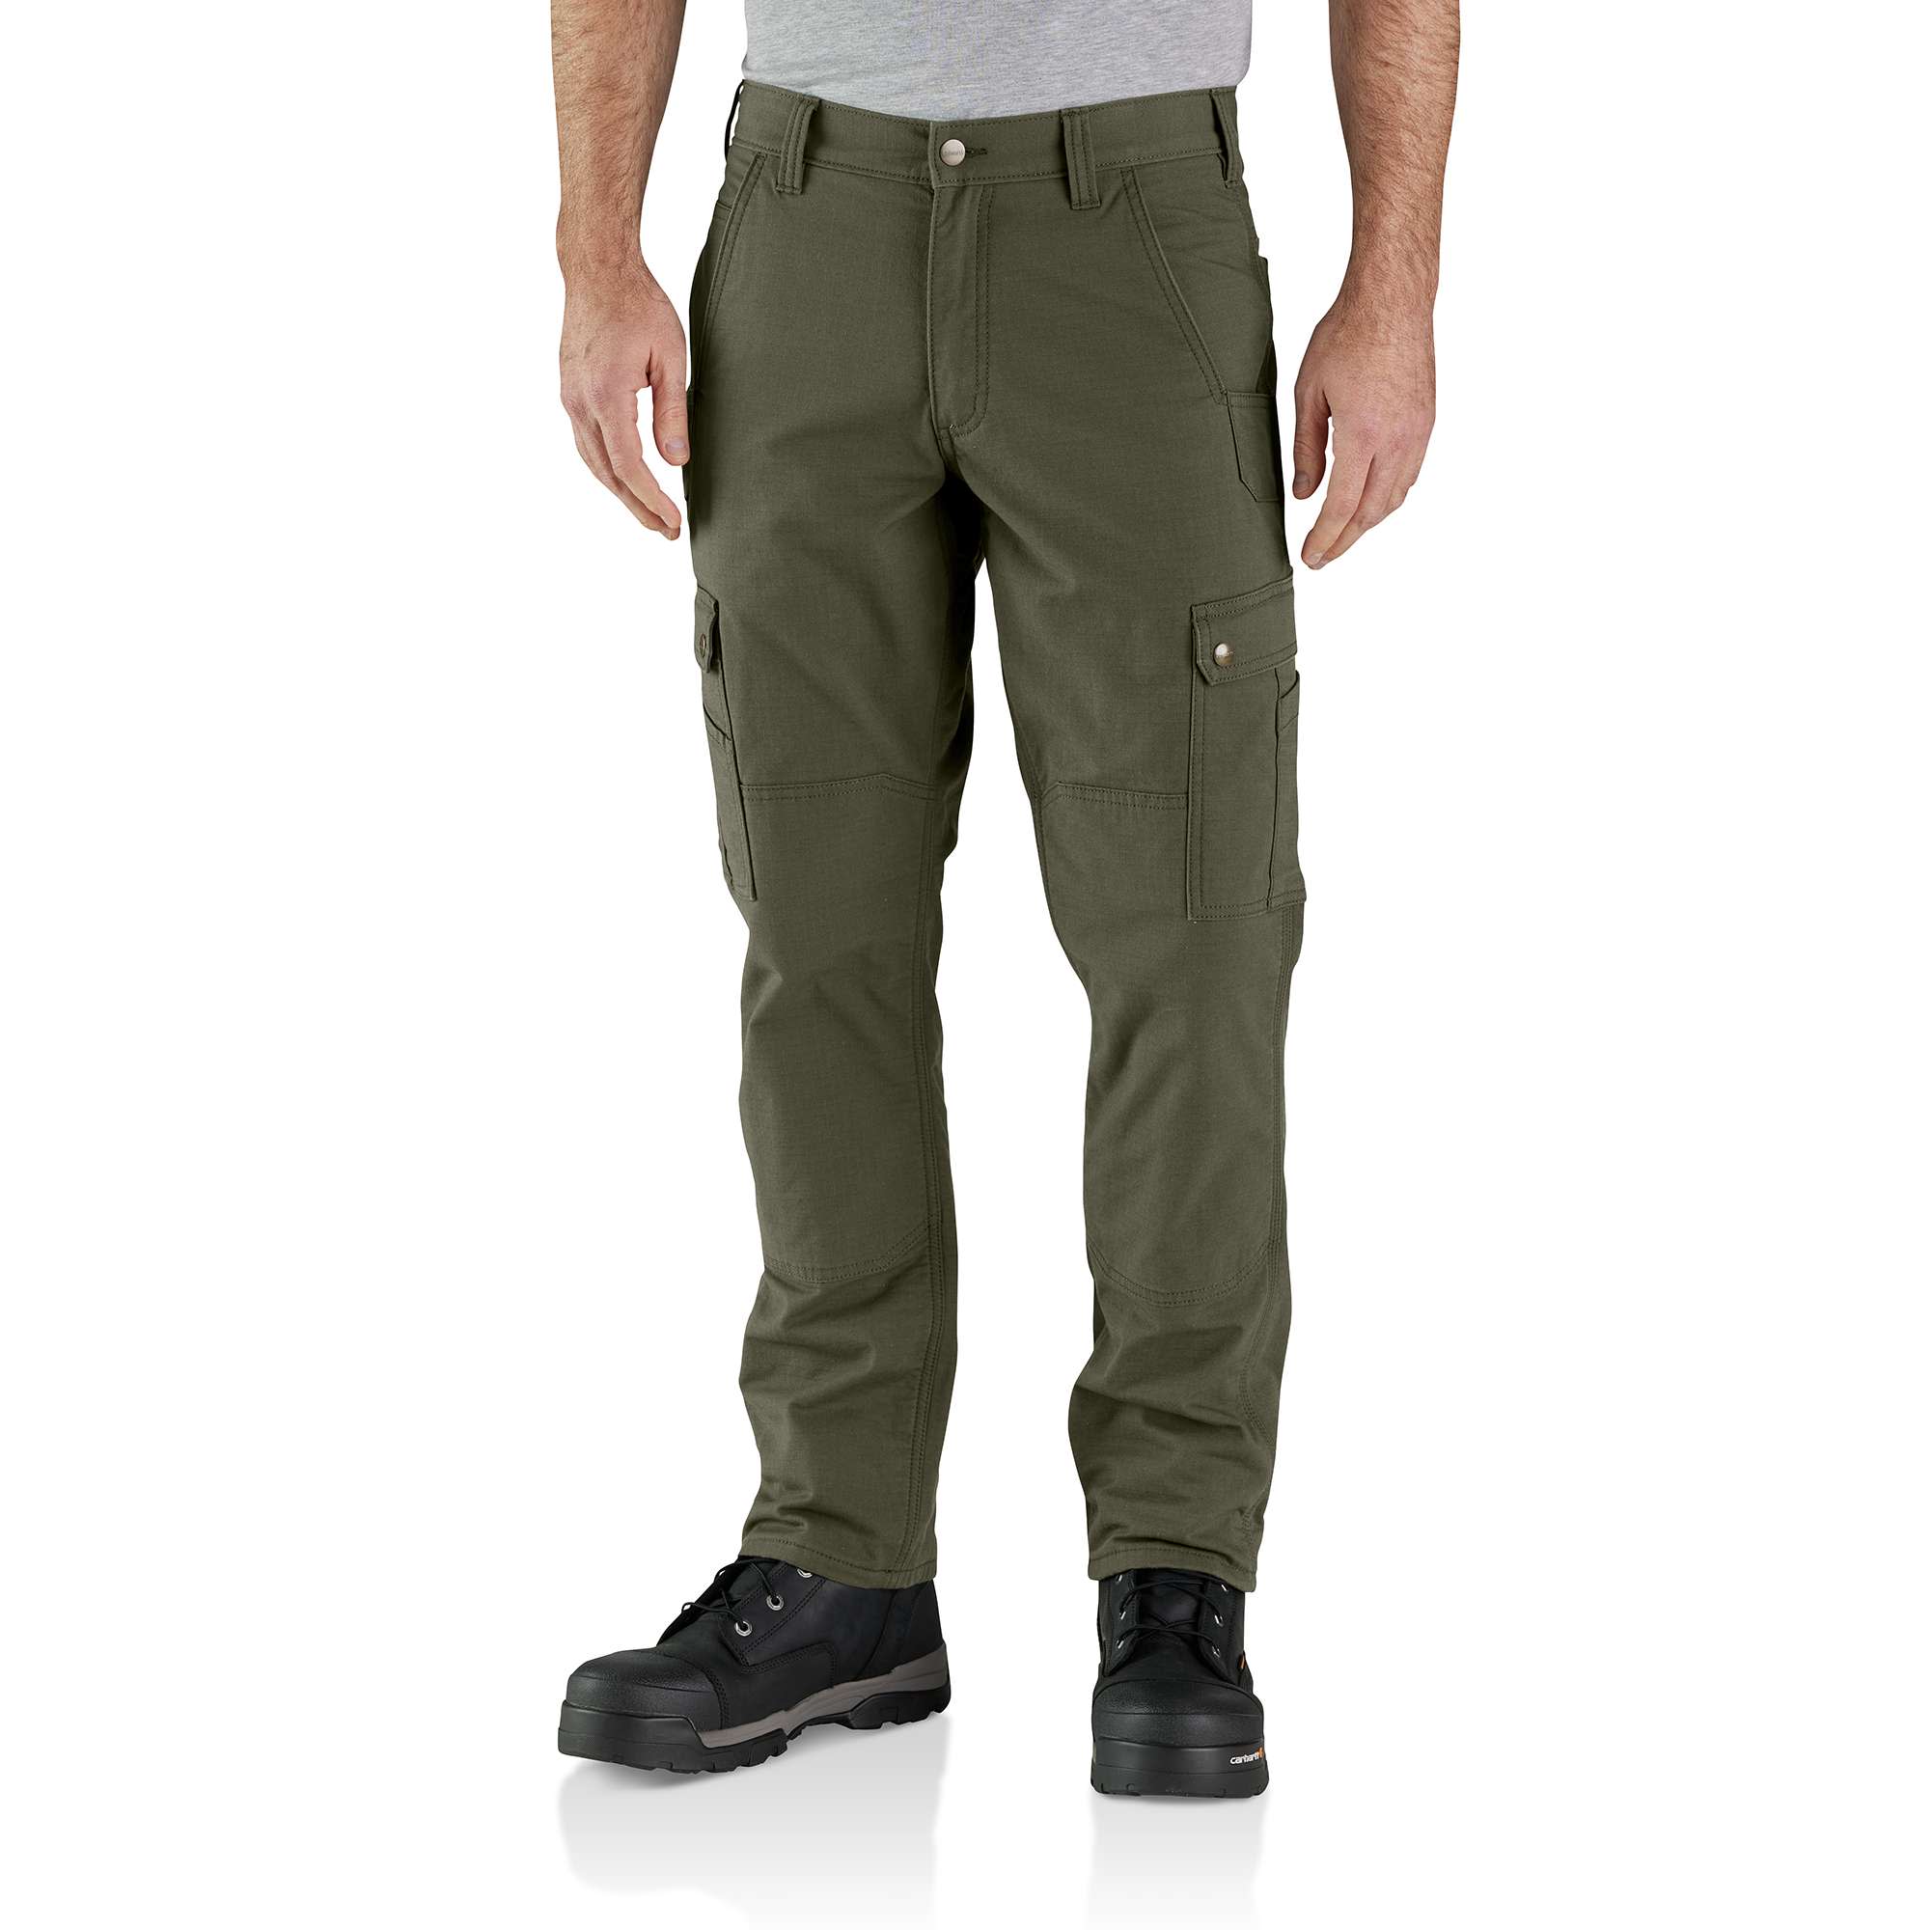 Carhartt WIP – Cole Cargo Pant Brown | Highsnobiety Shop